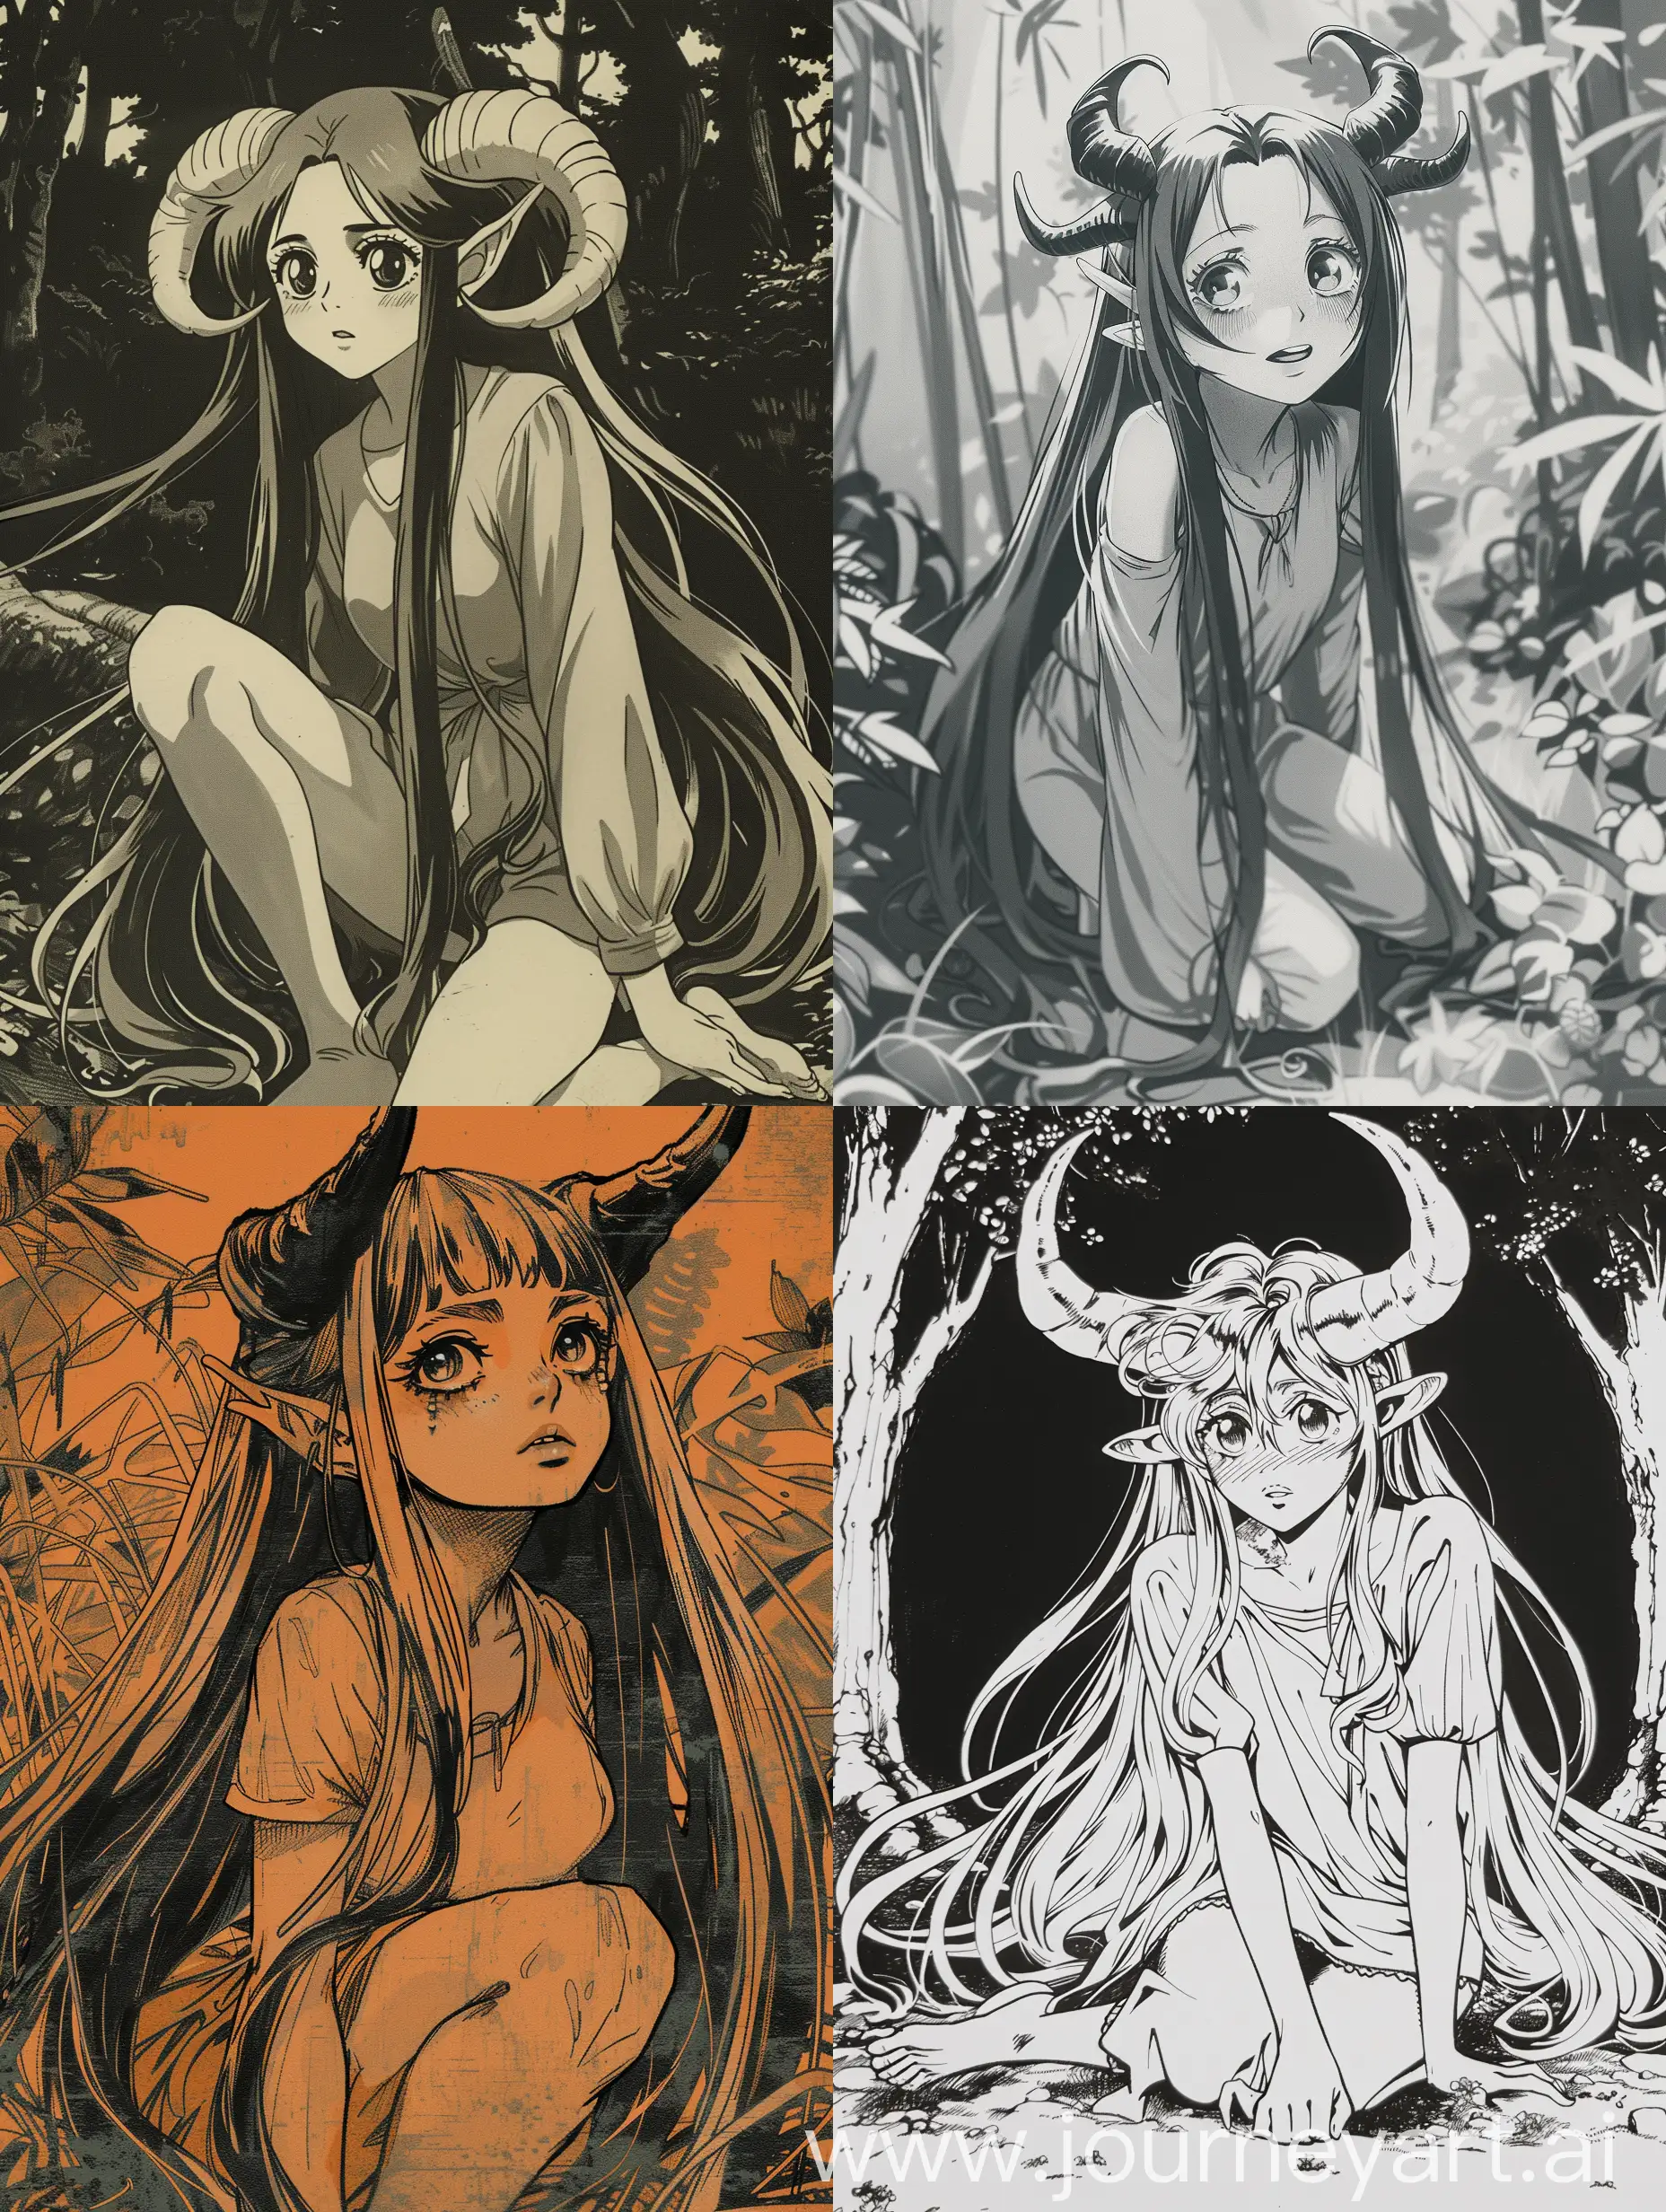 Devil woman reminiscent of 90's anime and Studio Ghibli. She has large, expressive eyes reflecting innocence and mischief. Her long, flowing hair adorned with horns cascades around her. Kneeling basking in the beauty of her surrounding. Like a scene from a Ghibli film. (VHS effect)